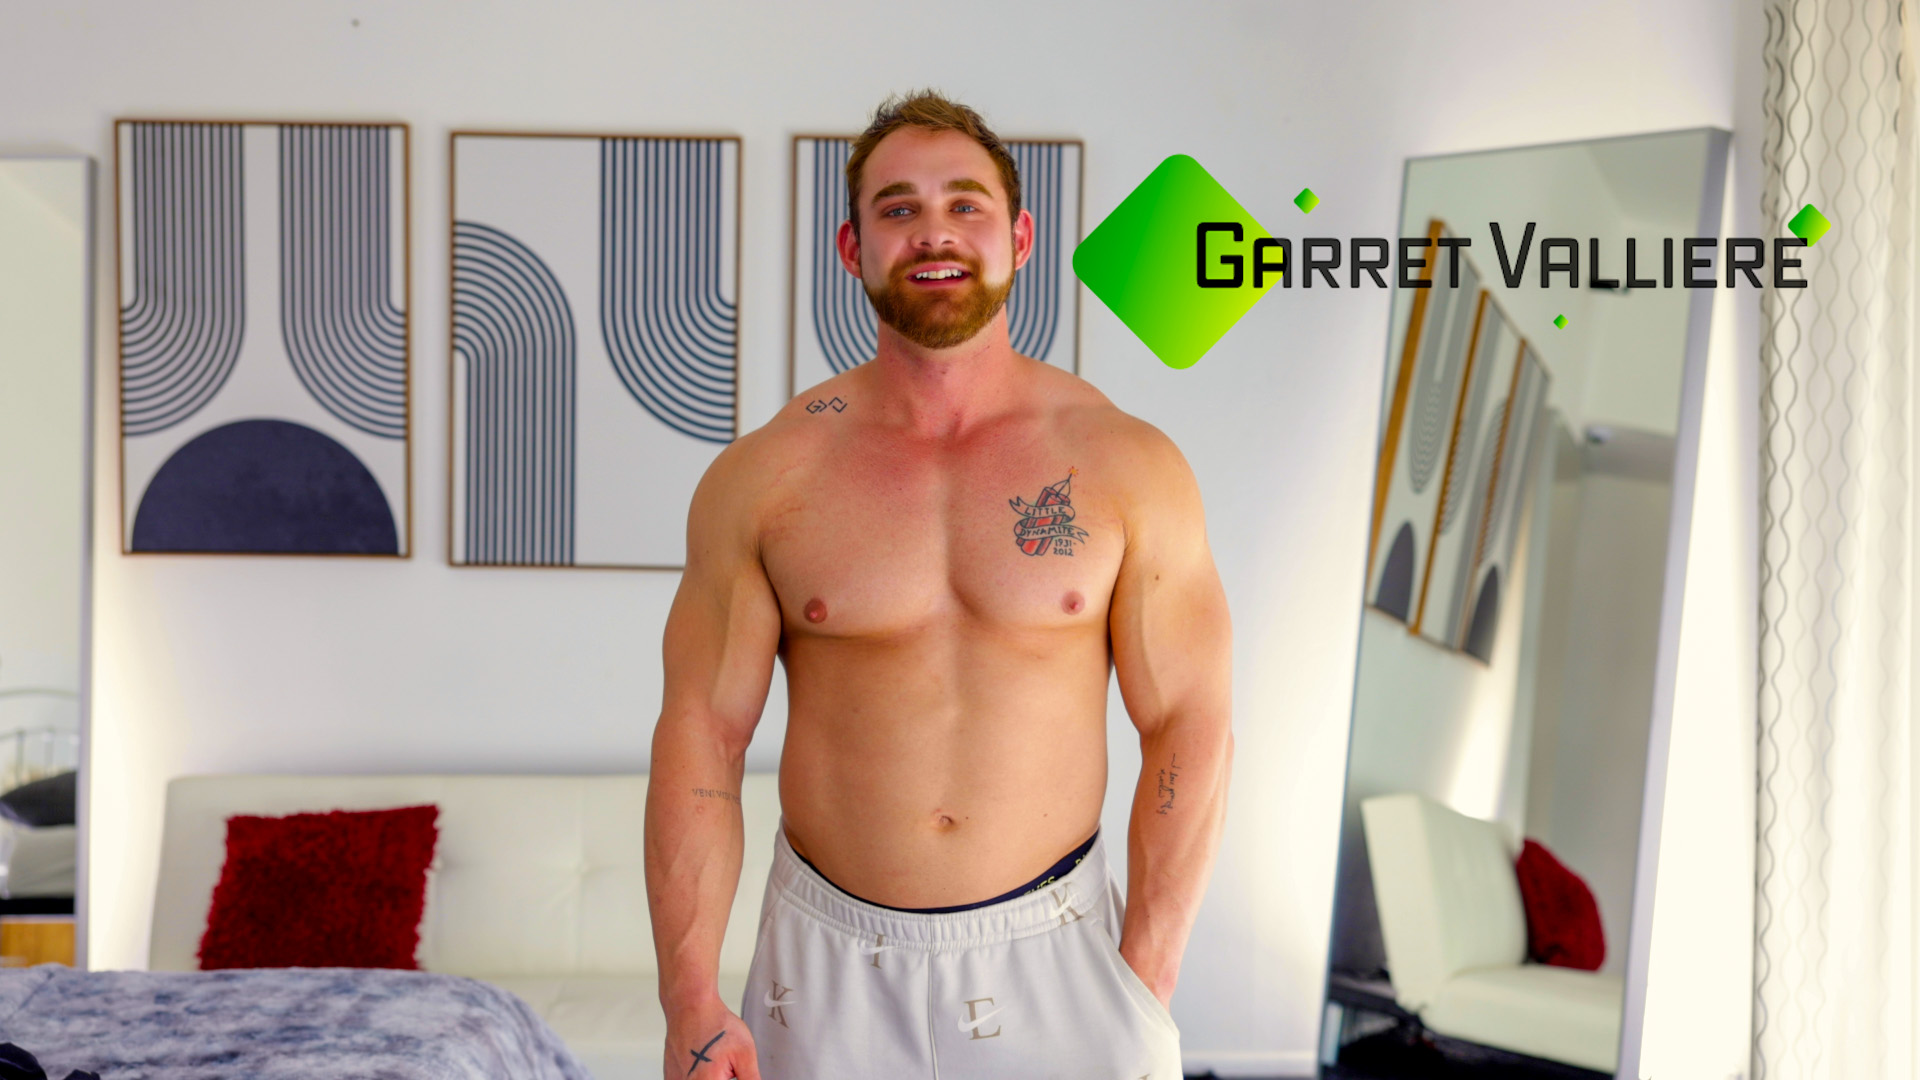 Interview: All Eyes Are On Muscle Man Garret Valliere!